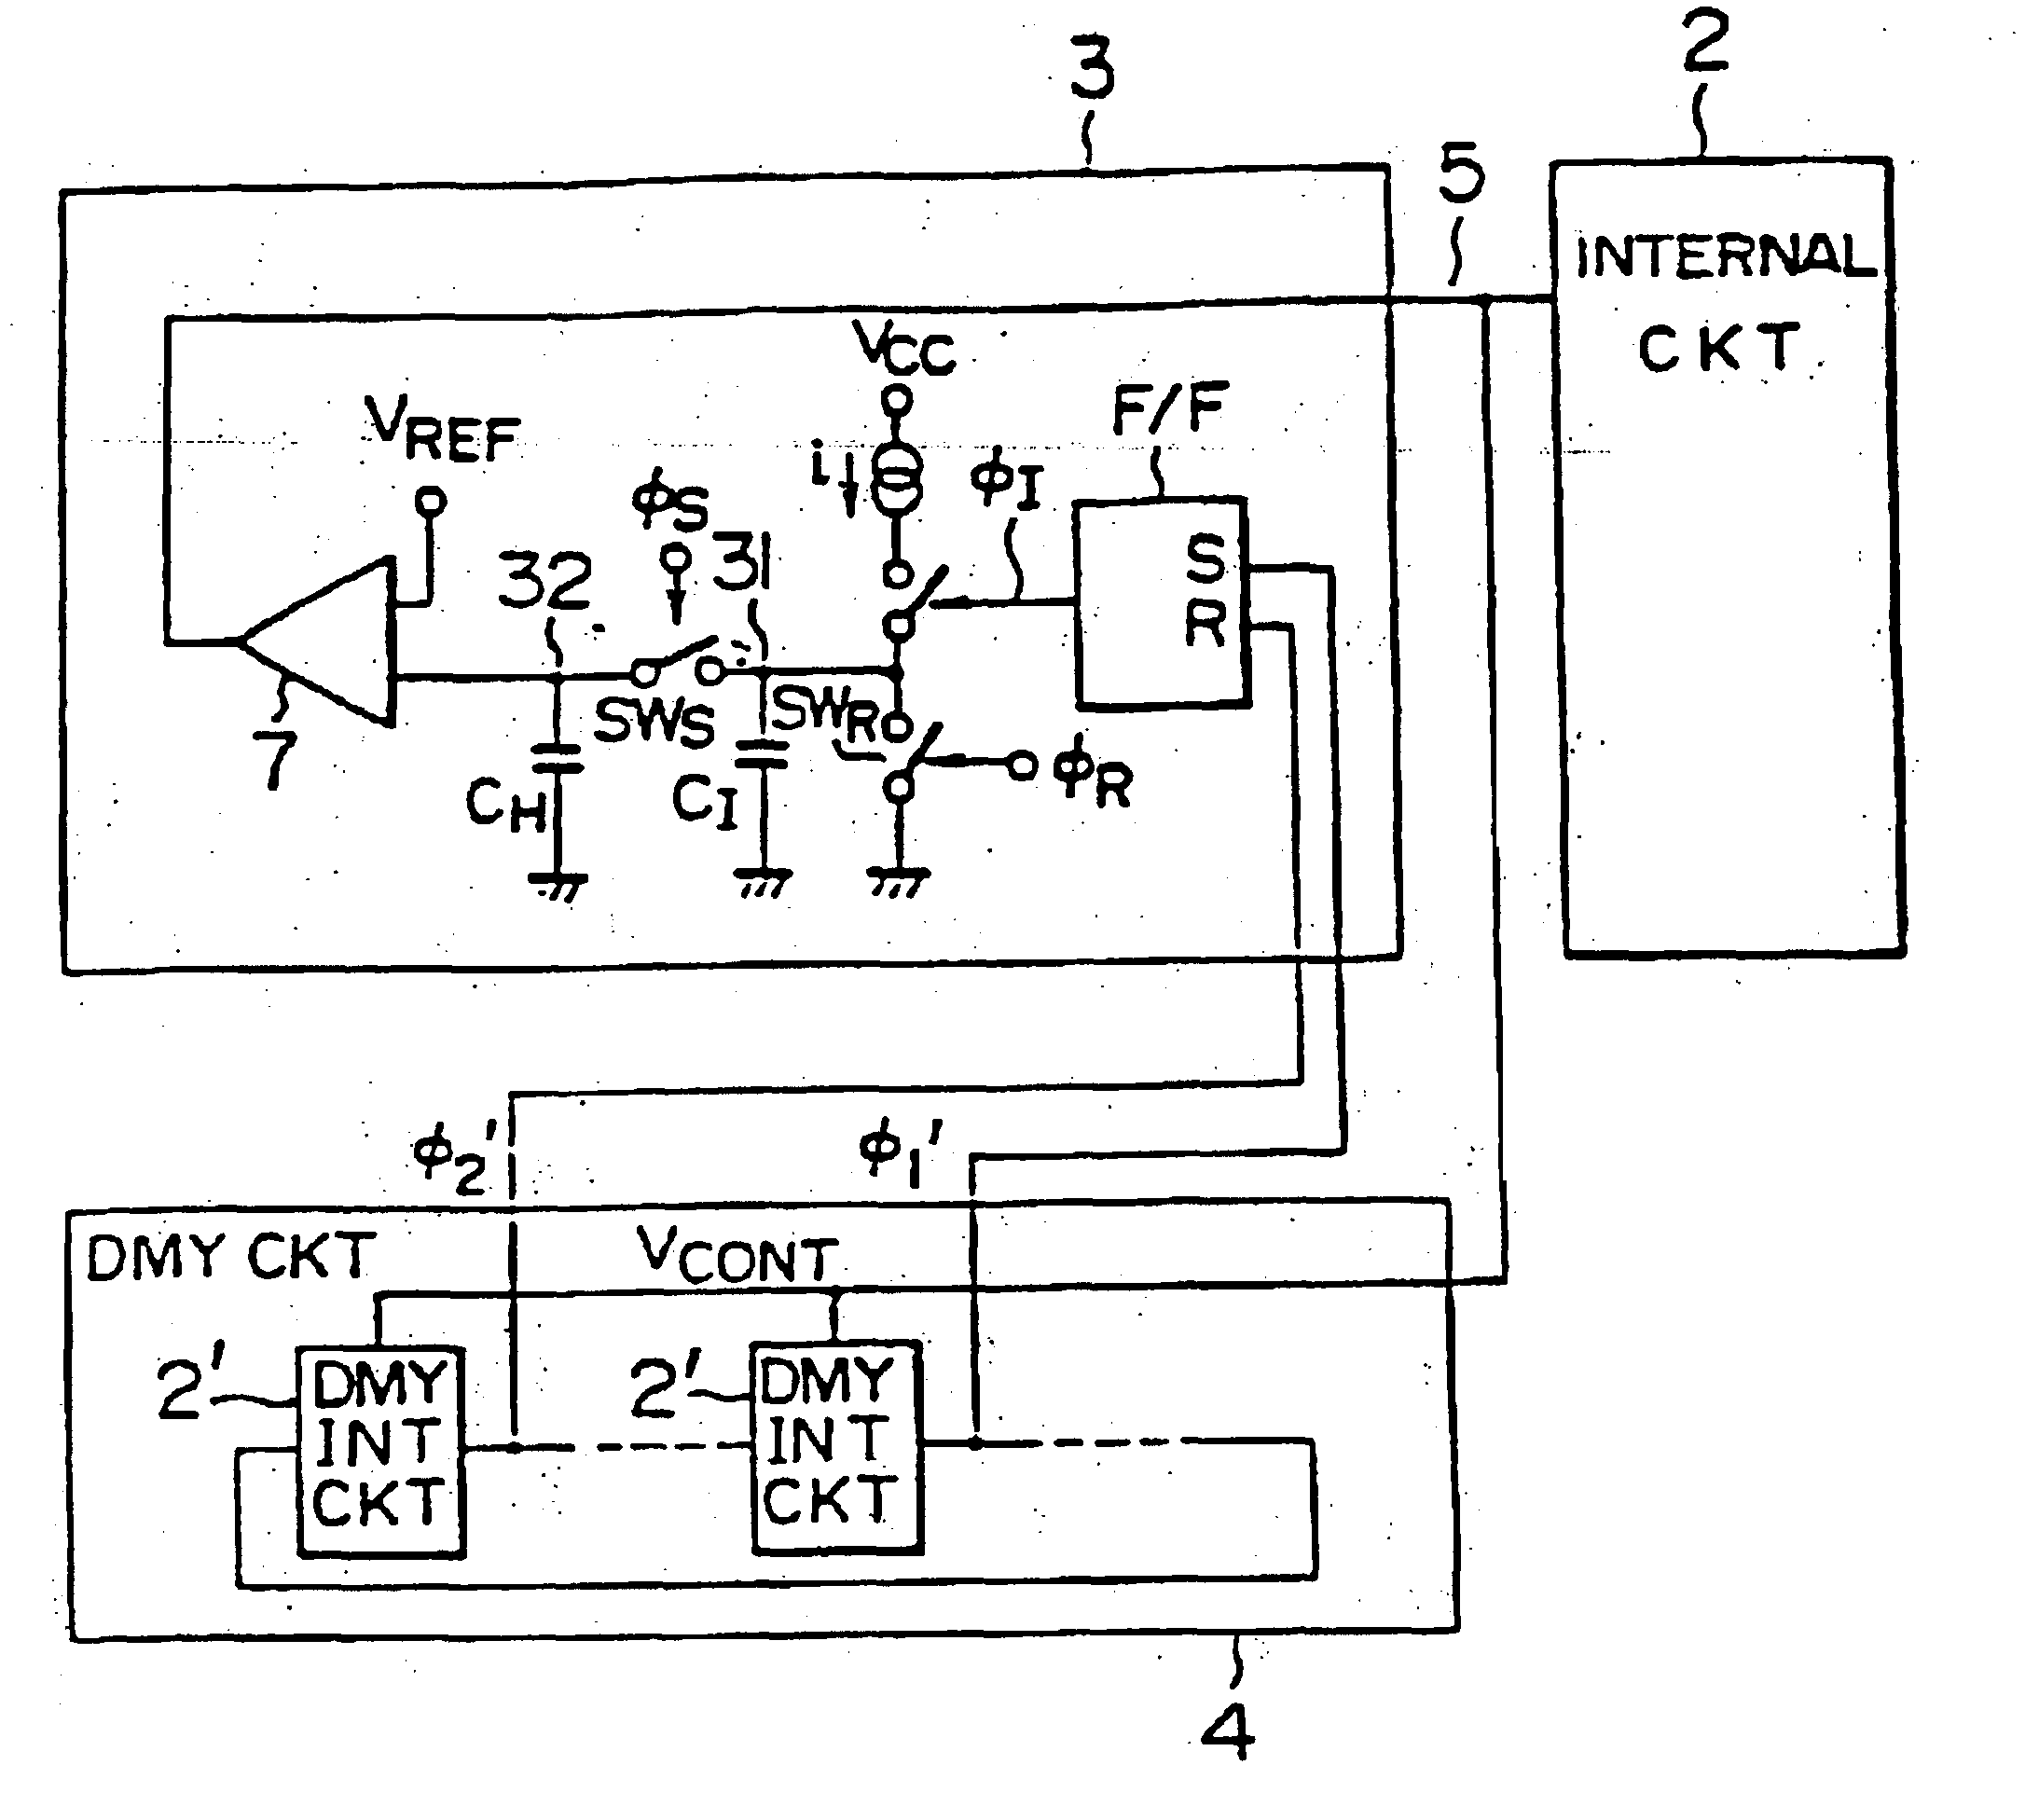 Semiconductor device incorporating internal power supply for compensating for deviation in operating condition and fabrication process conditions